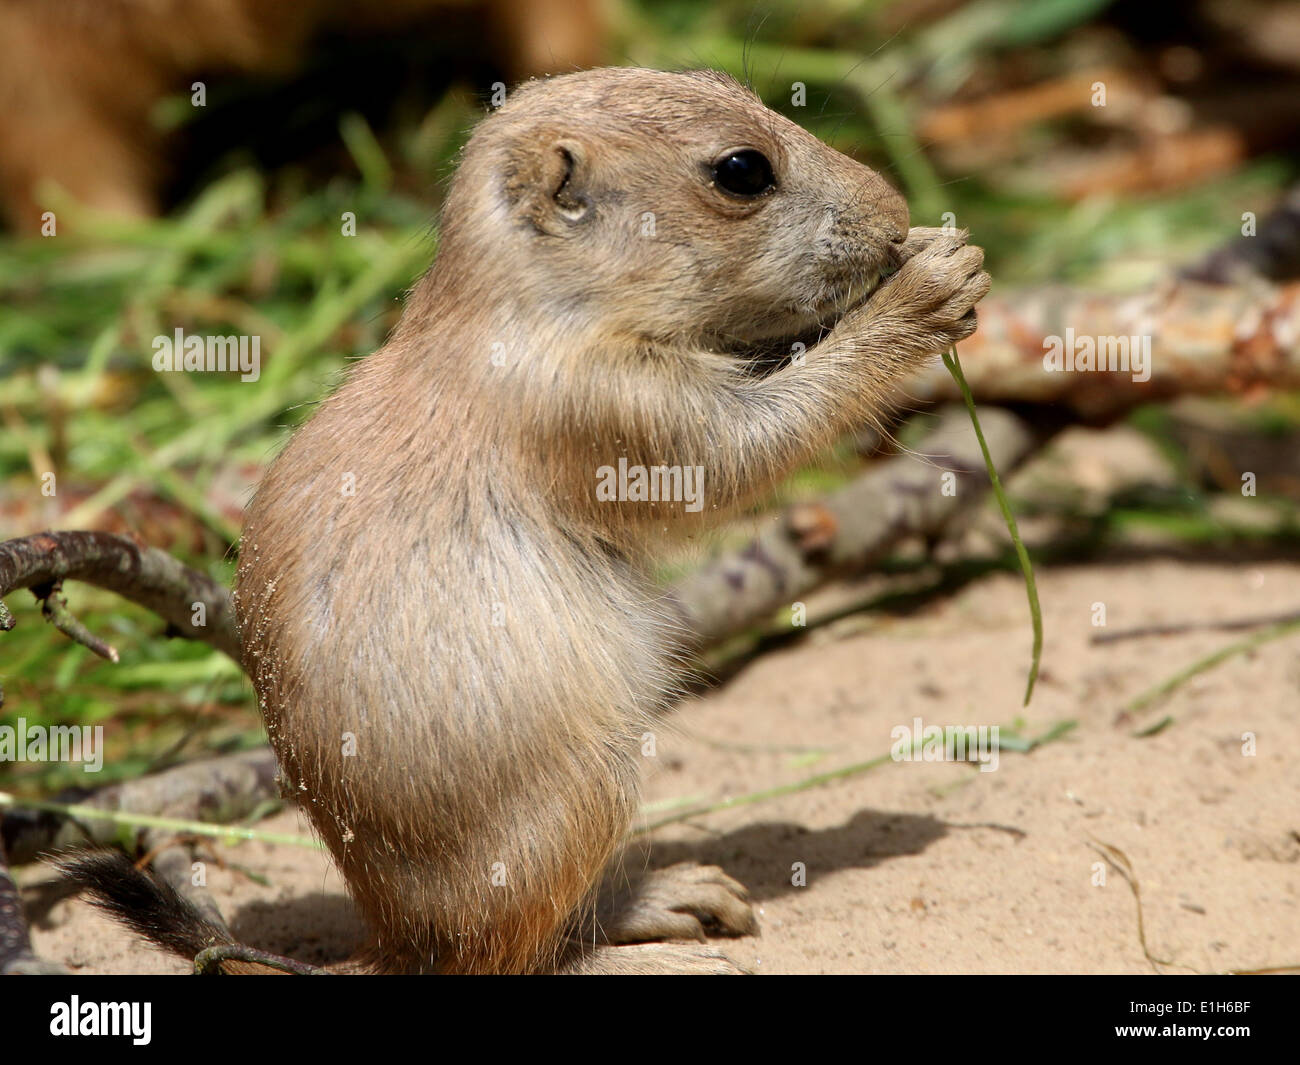 what are prairie dog babies called